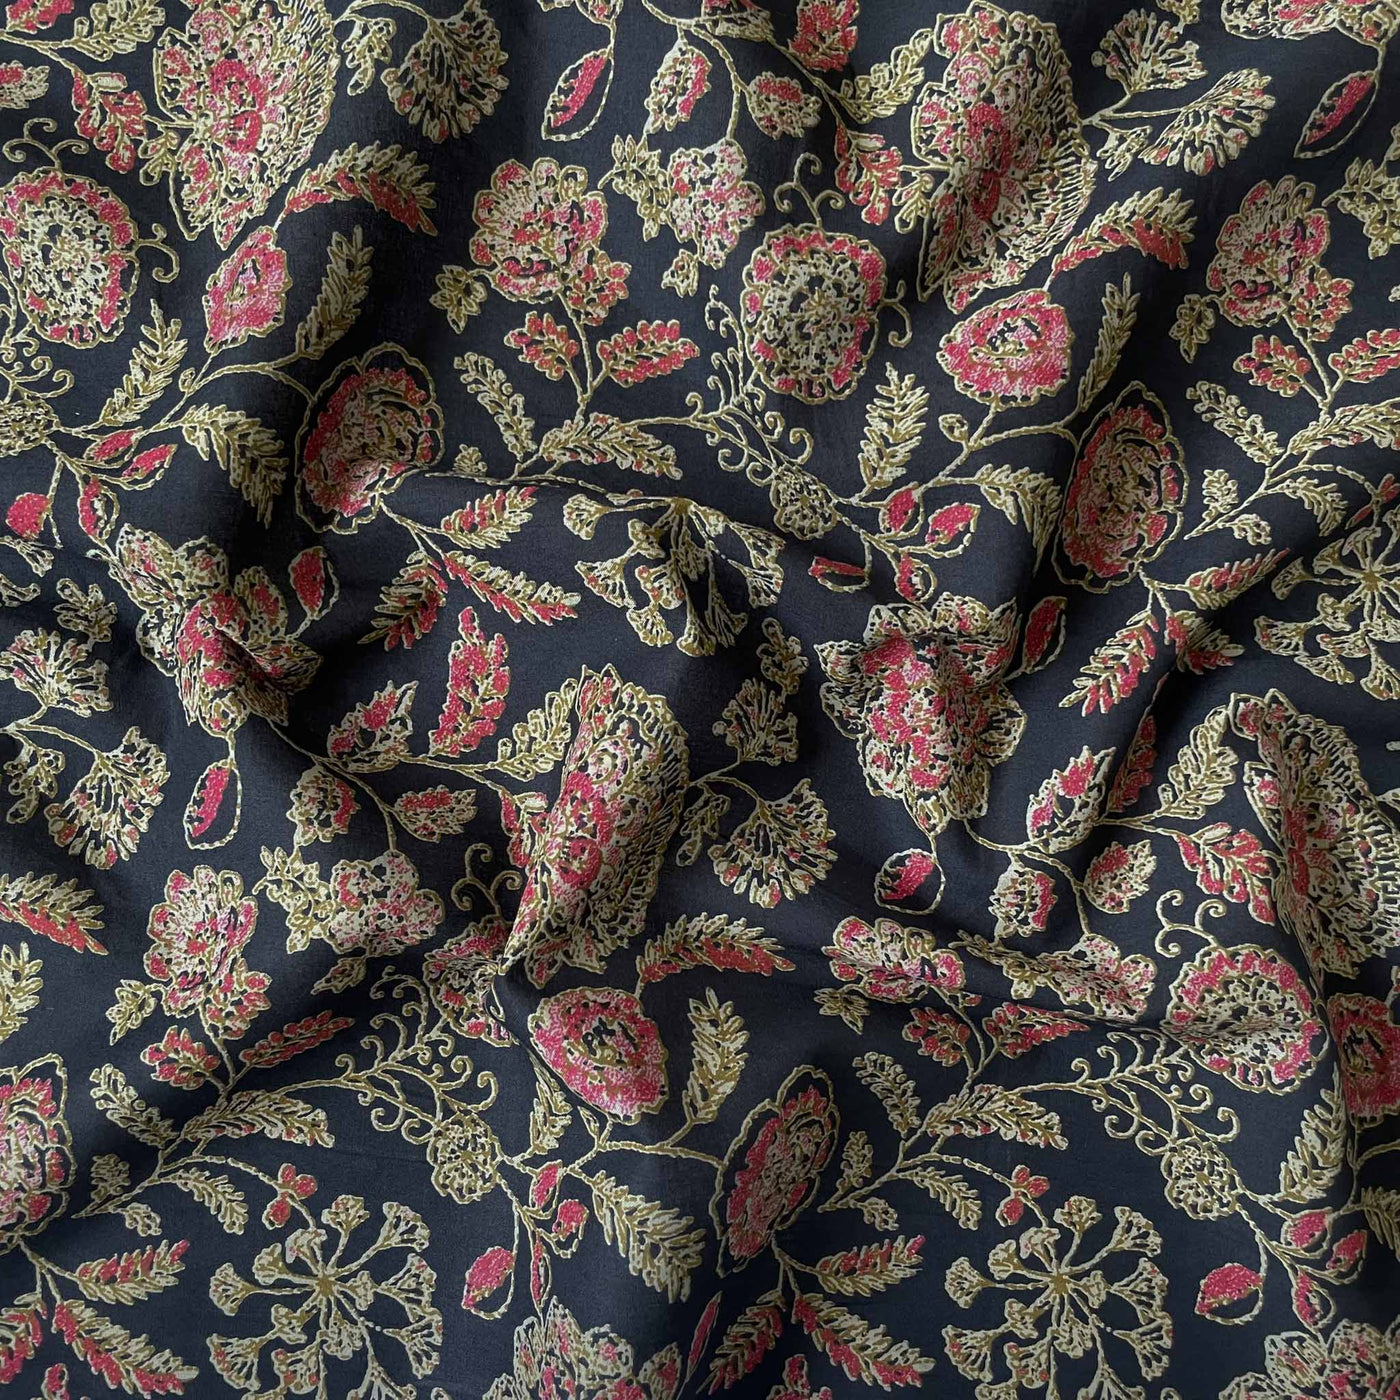 Fabric Pandit Cut Piece (CUT PIECE) Black and Red Wild Flowers Hand Block Printed Pure Cotton Fabric Width (43 inches)